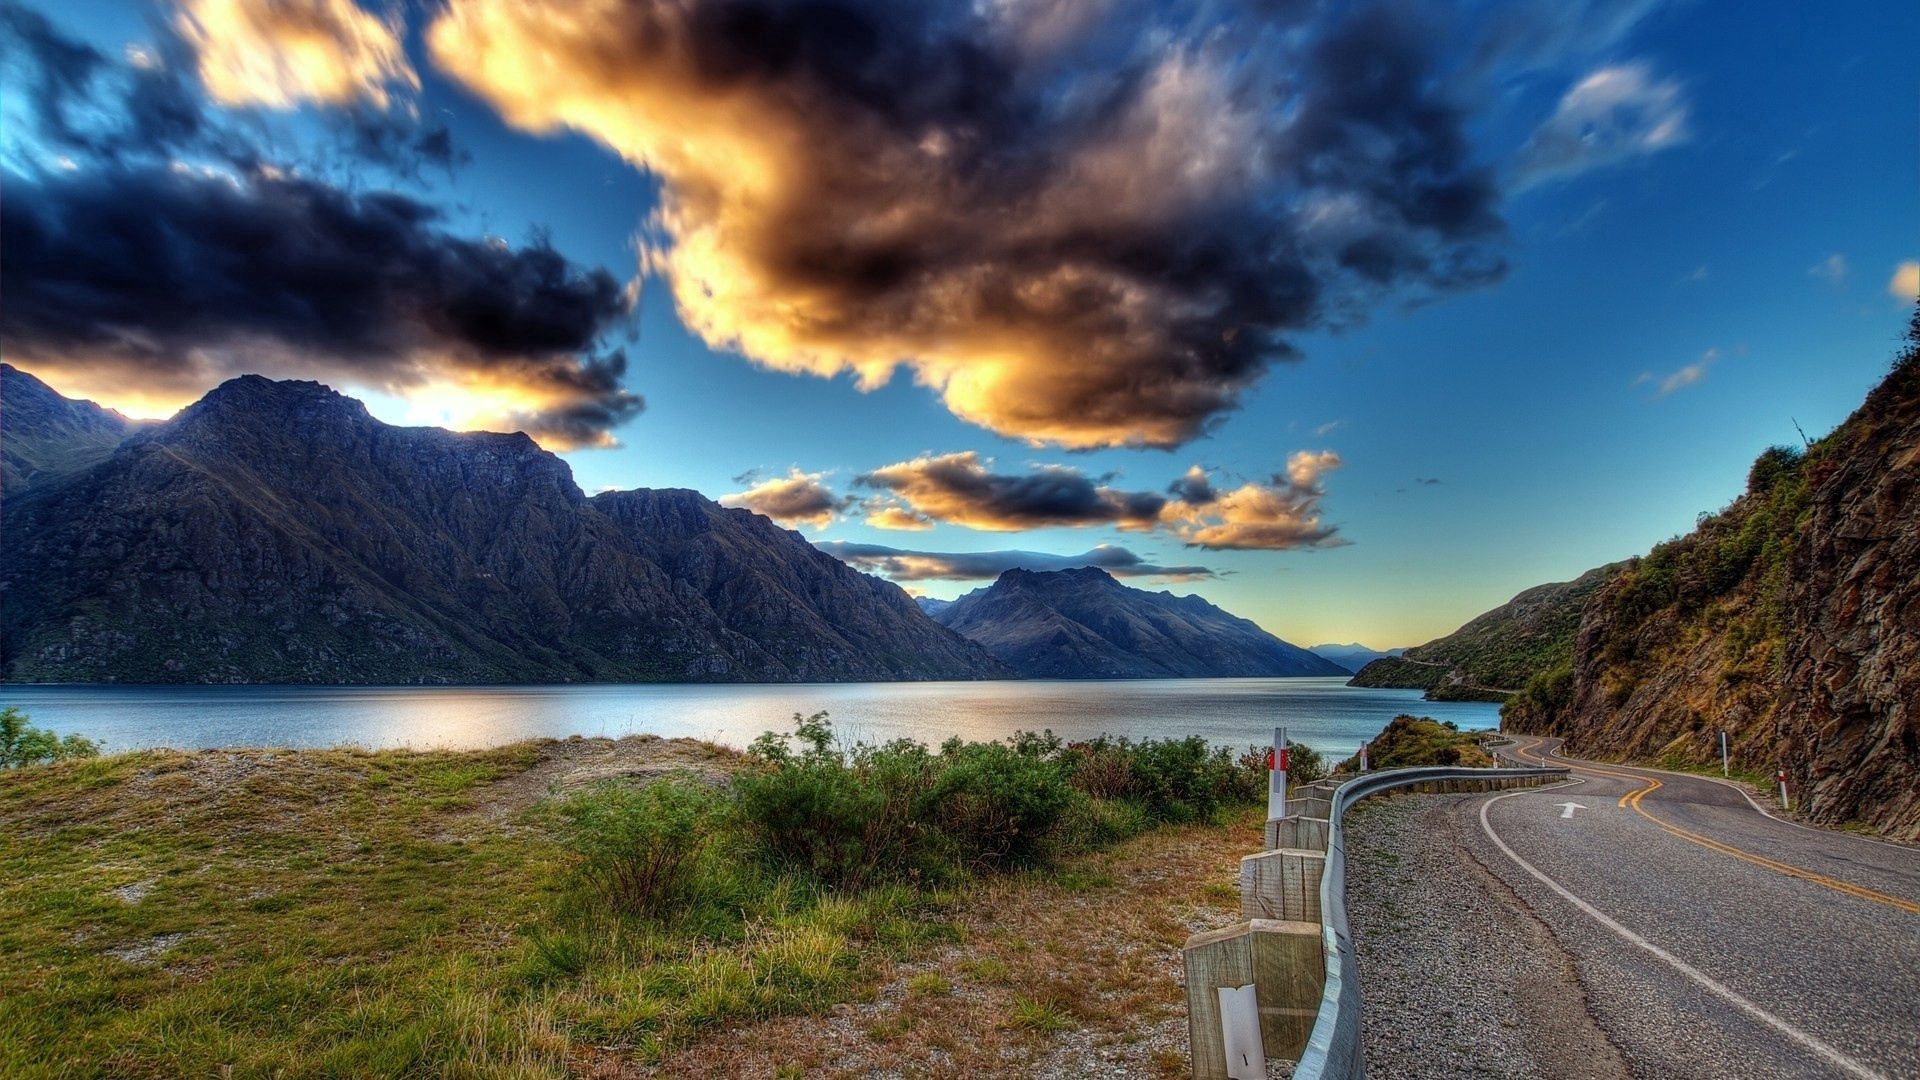 Download wallpaper 1920x1080 road, clouds, river, mountains